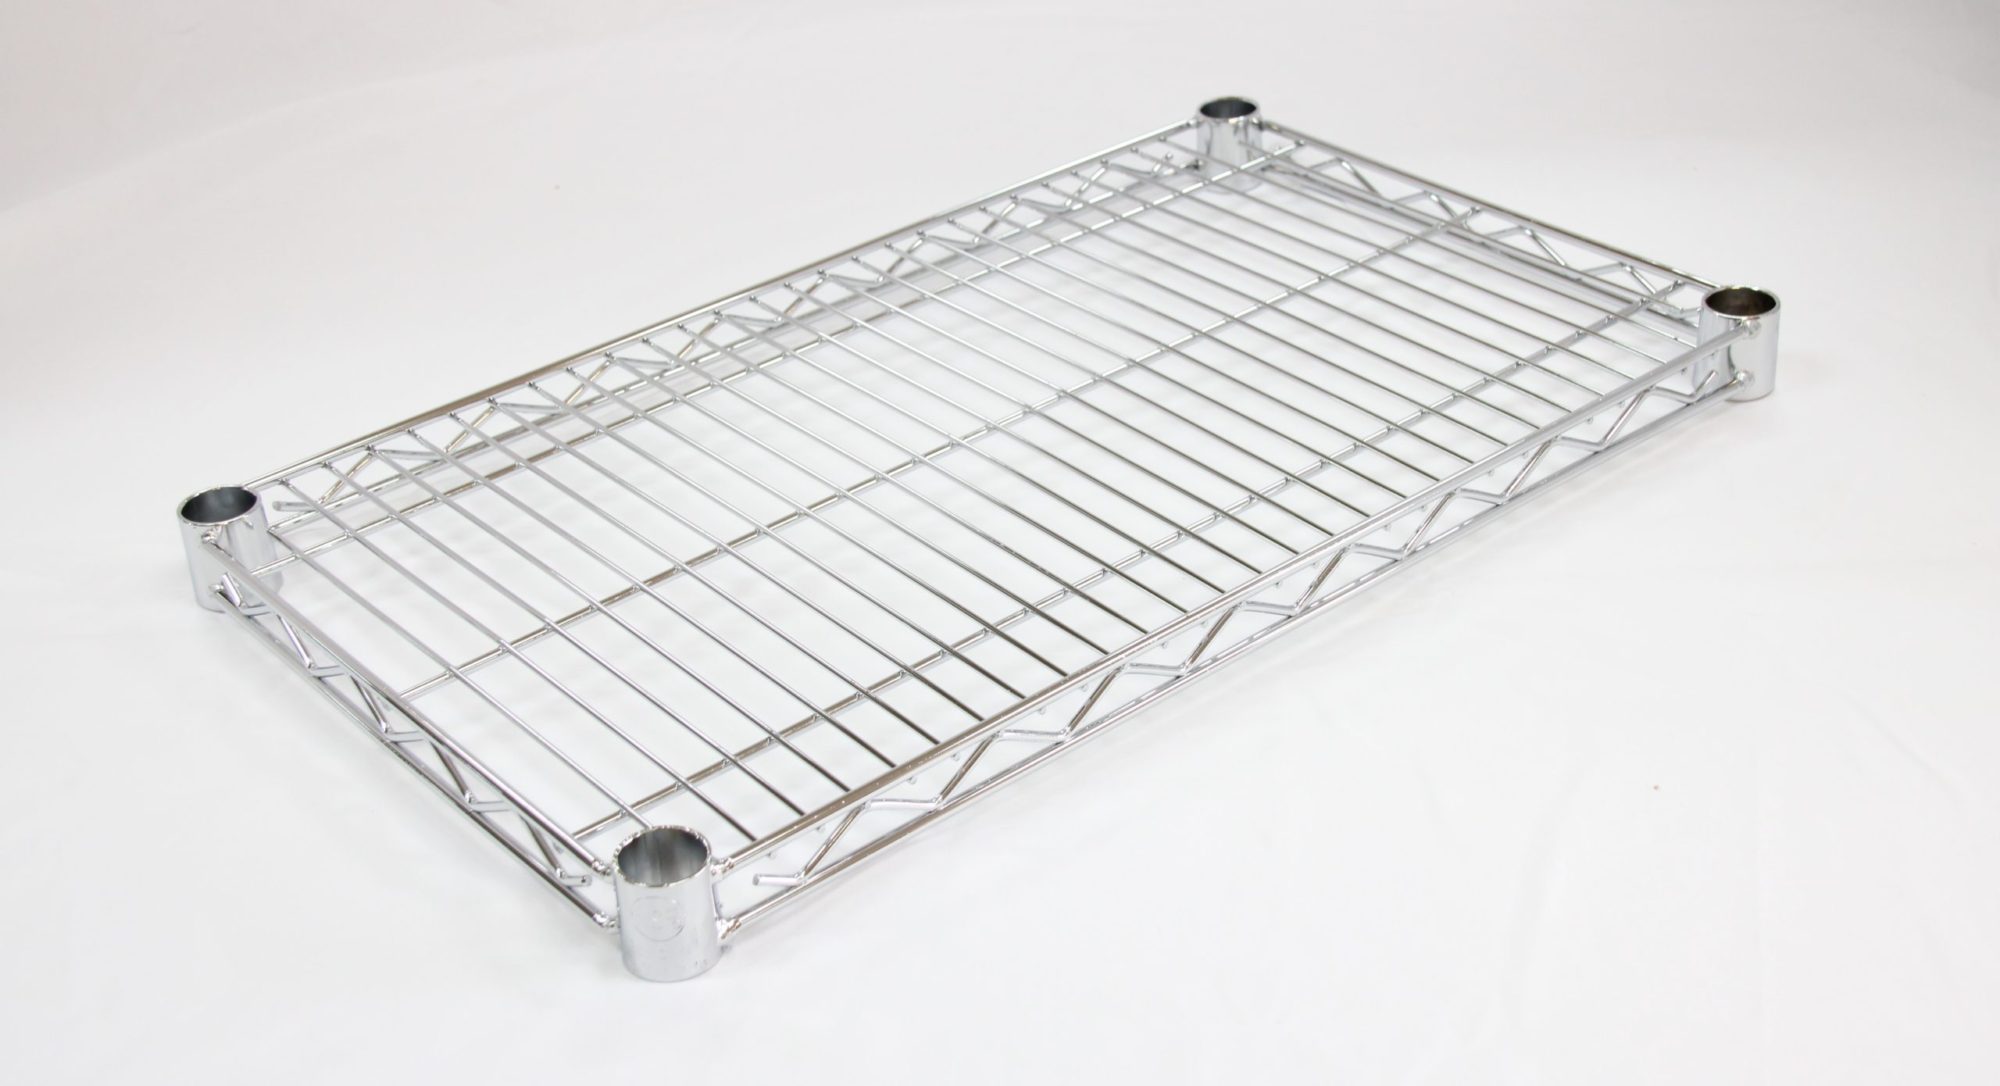 Omcan Wire Mesh Shelving 14" x 48" 20102 Chrome 2 Pack-S1448C